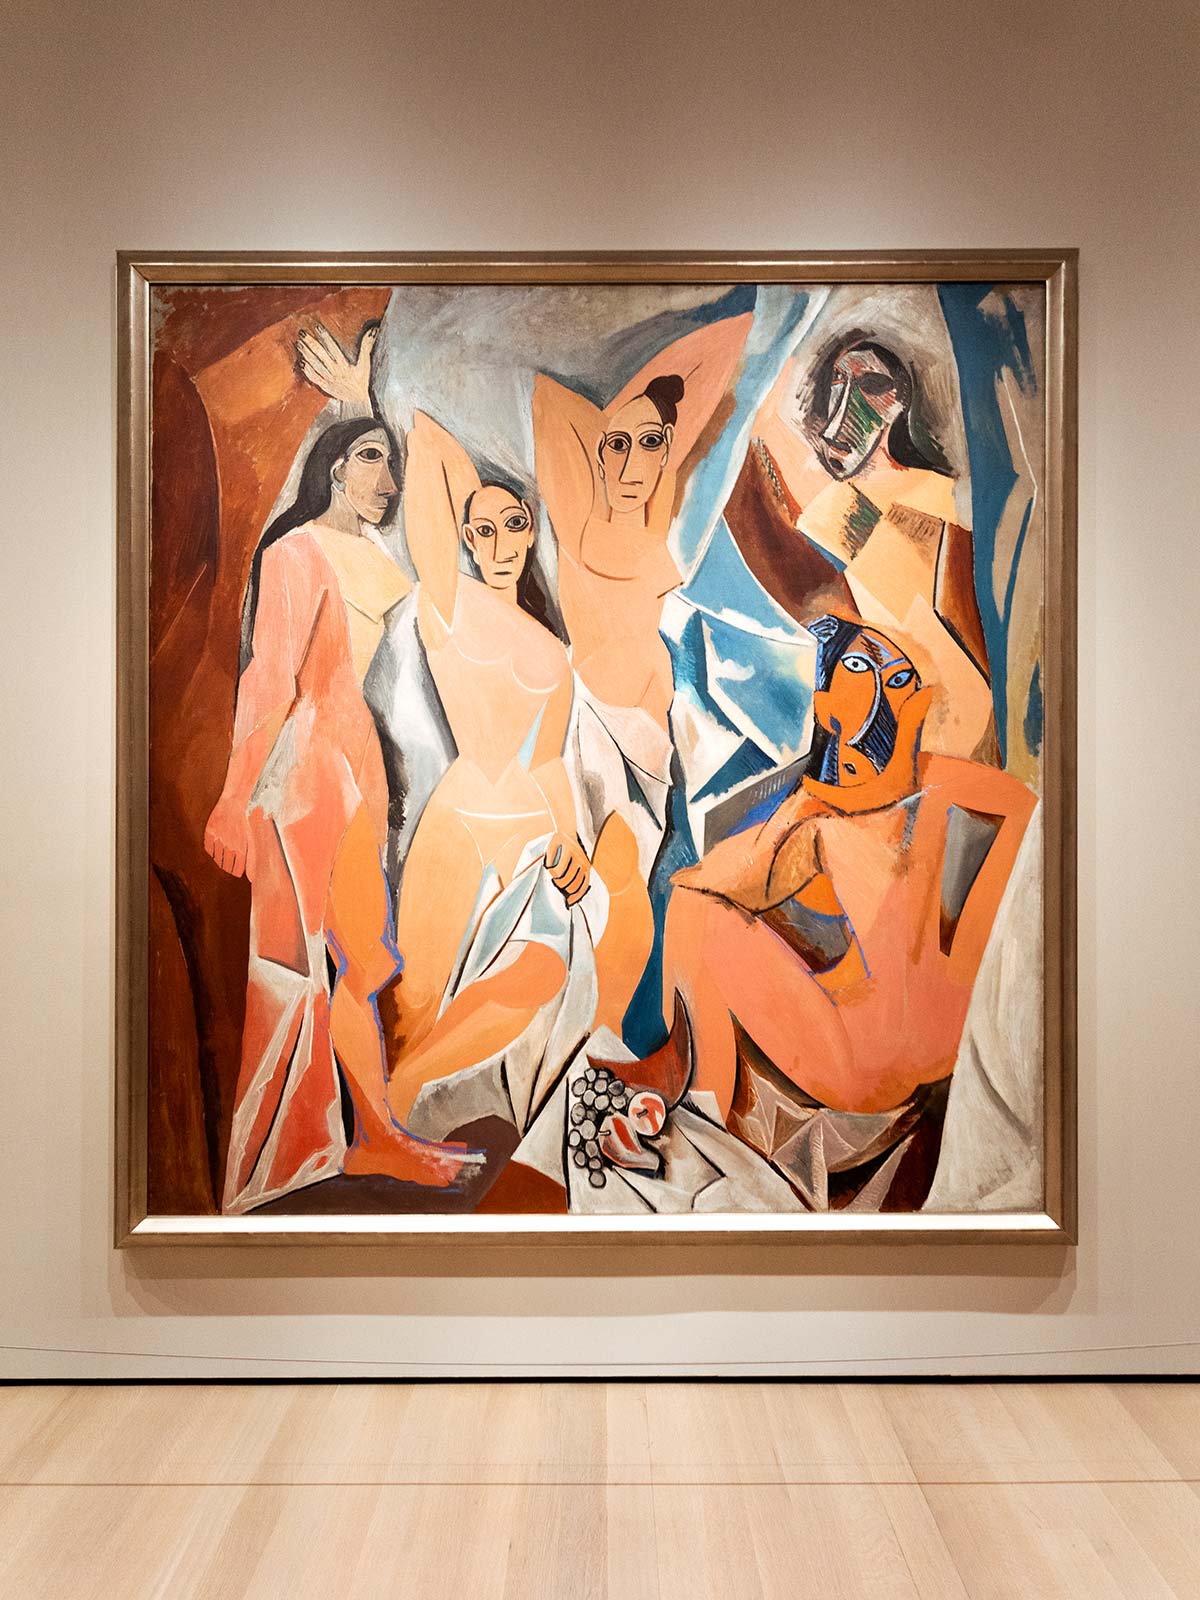 Demoiselles d’Avignon, Picasso, Musée MoMA, New York, États-Unis / Demoiselles d’Avignon, Picasso, MoMA Museum, NY, NYC, USA